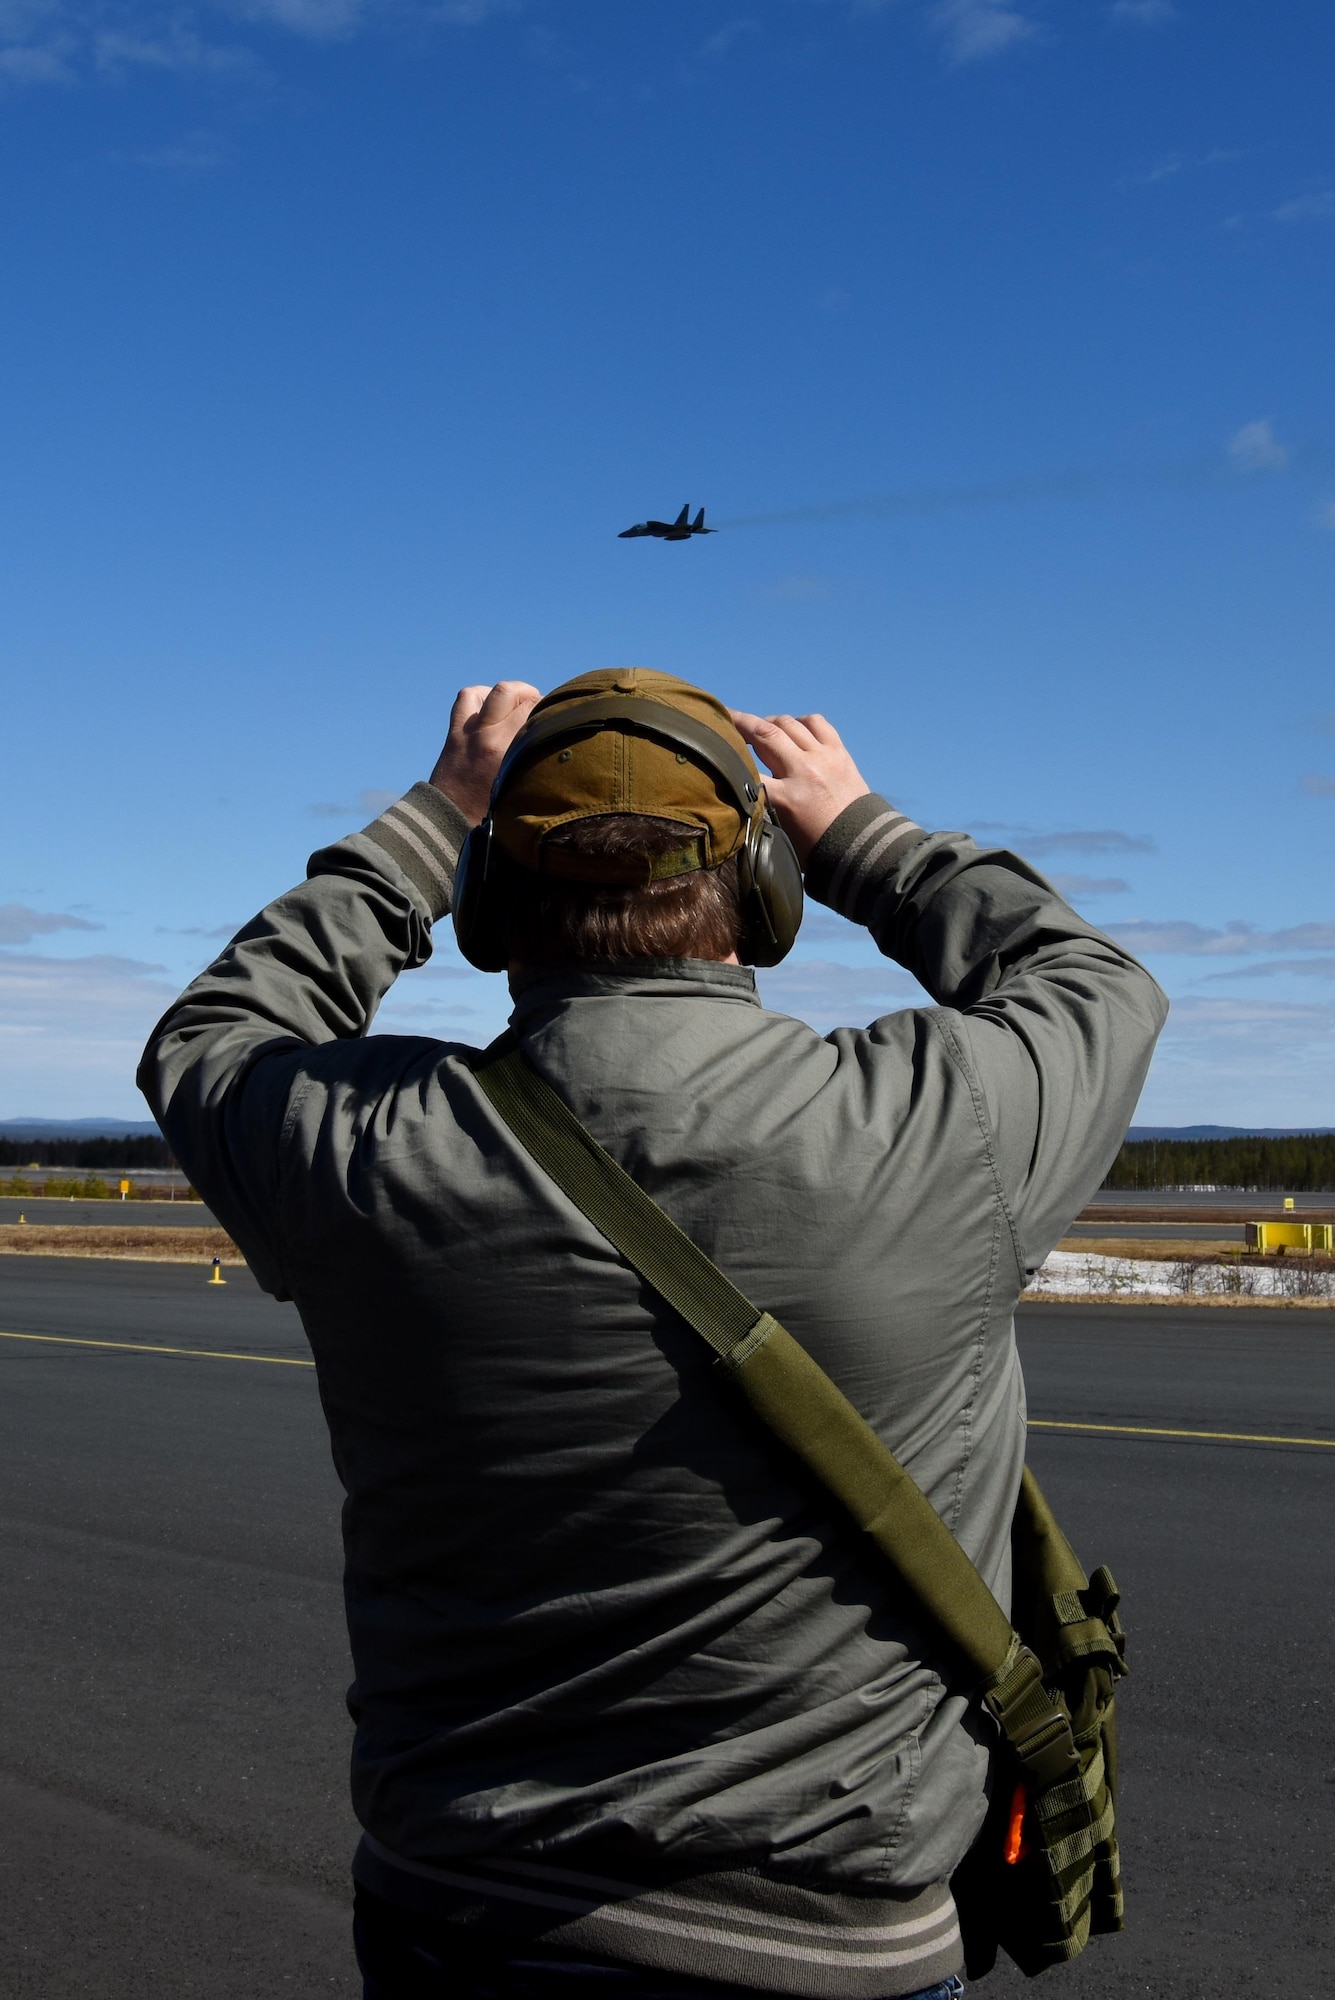 A media representative takes a photo of an aircraft during the Arctic Challenge 2017 media day at Rovaniemi Air Base, Finland, May 23. Media representatives from multiple nations gathered to learn about the exercise, which is aimed at strengthening partnerships between participating armed forces. (U.S. Air Force photo/Airman 1st Class Abby L. Finkel)